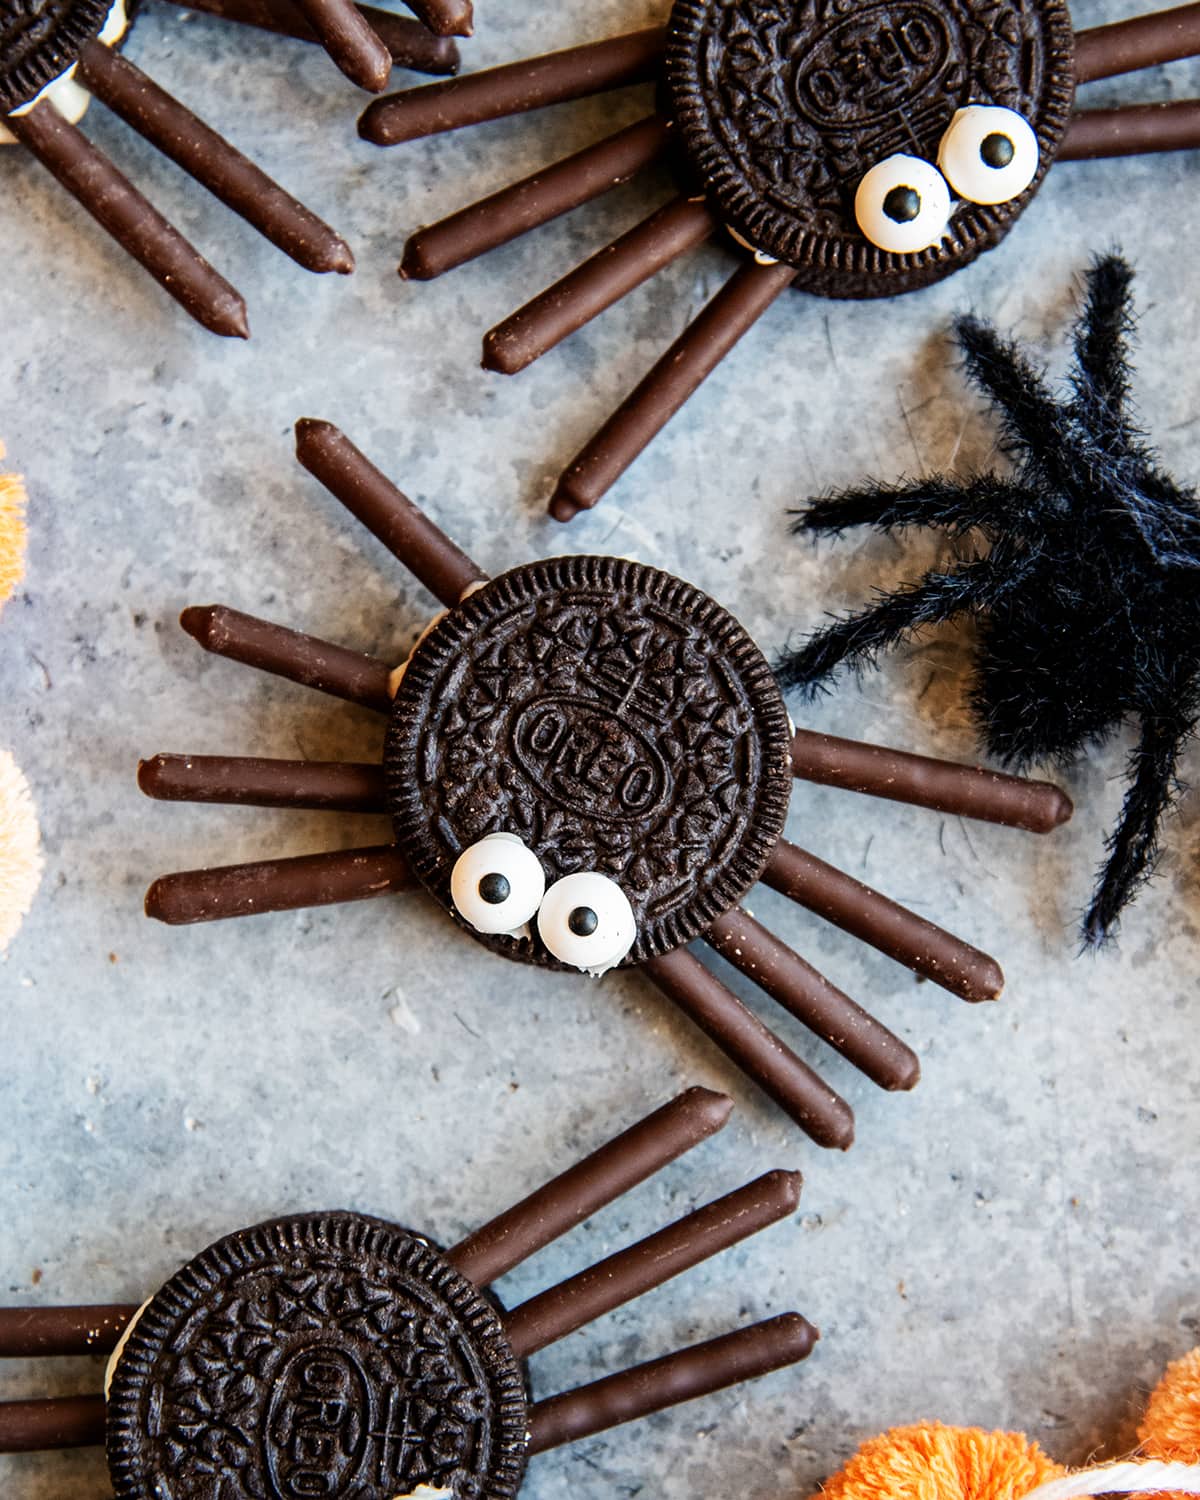 An Oreo spider with two candy eyes on top, and chocolate pocky sticks for the legs.